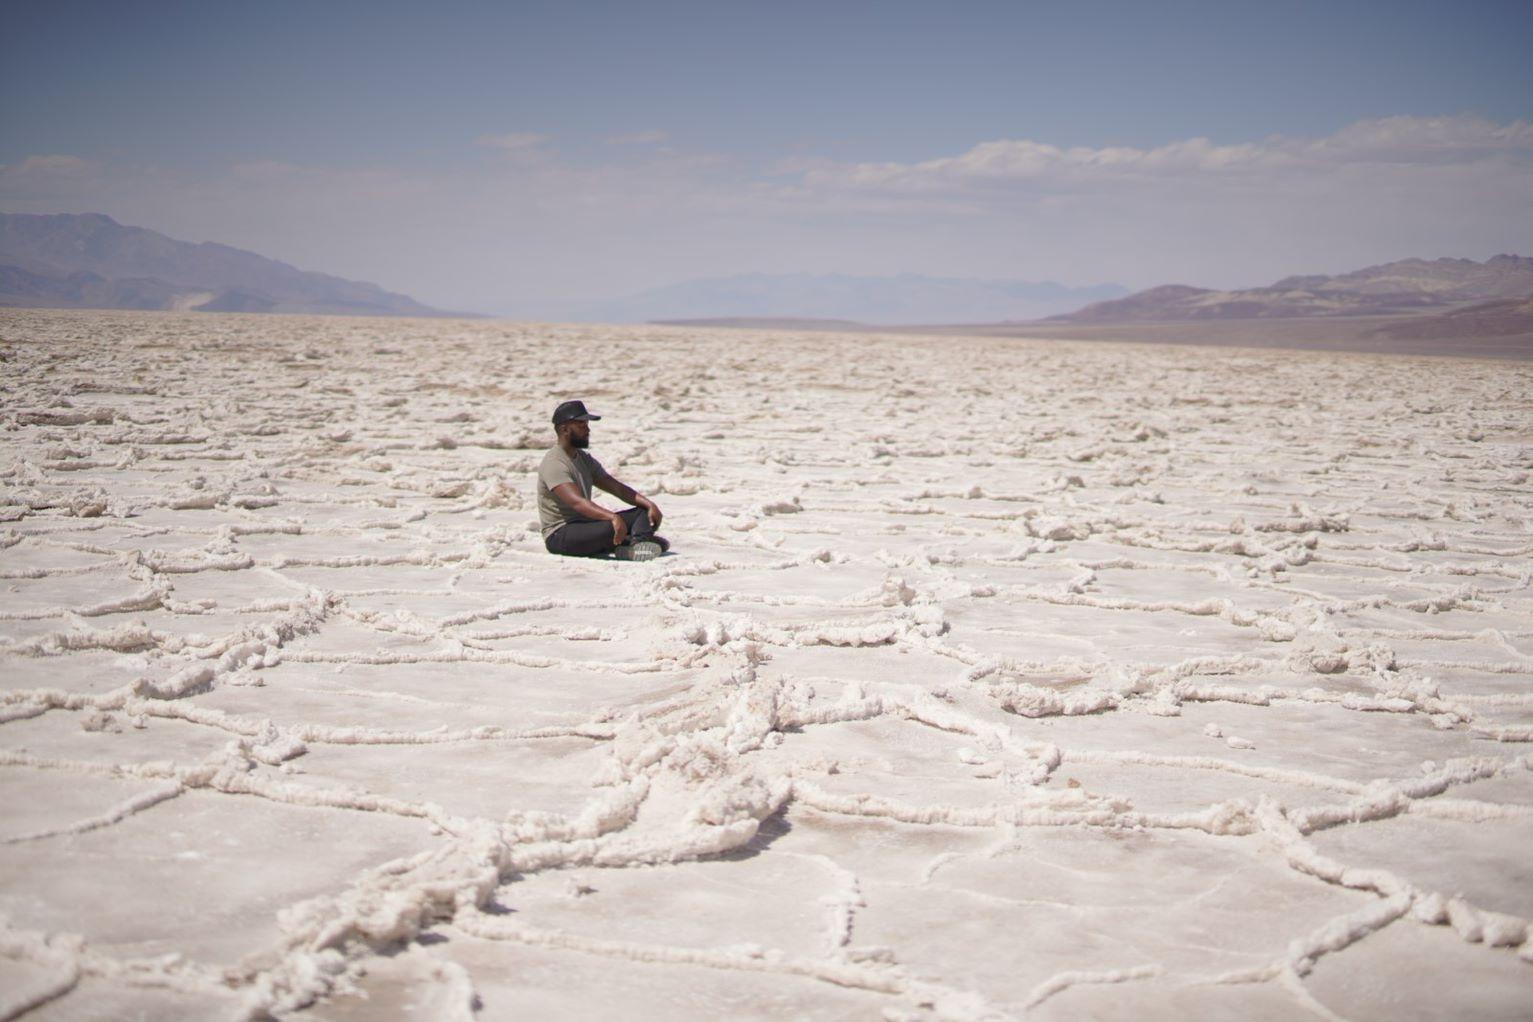 Baratunde Thurston at the Badwater Basin in Death Valley National Park, CA